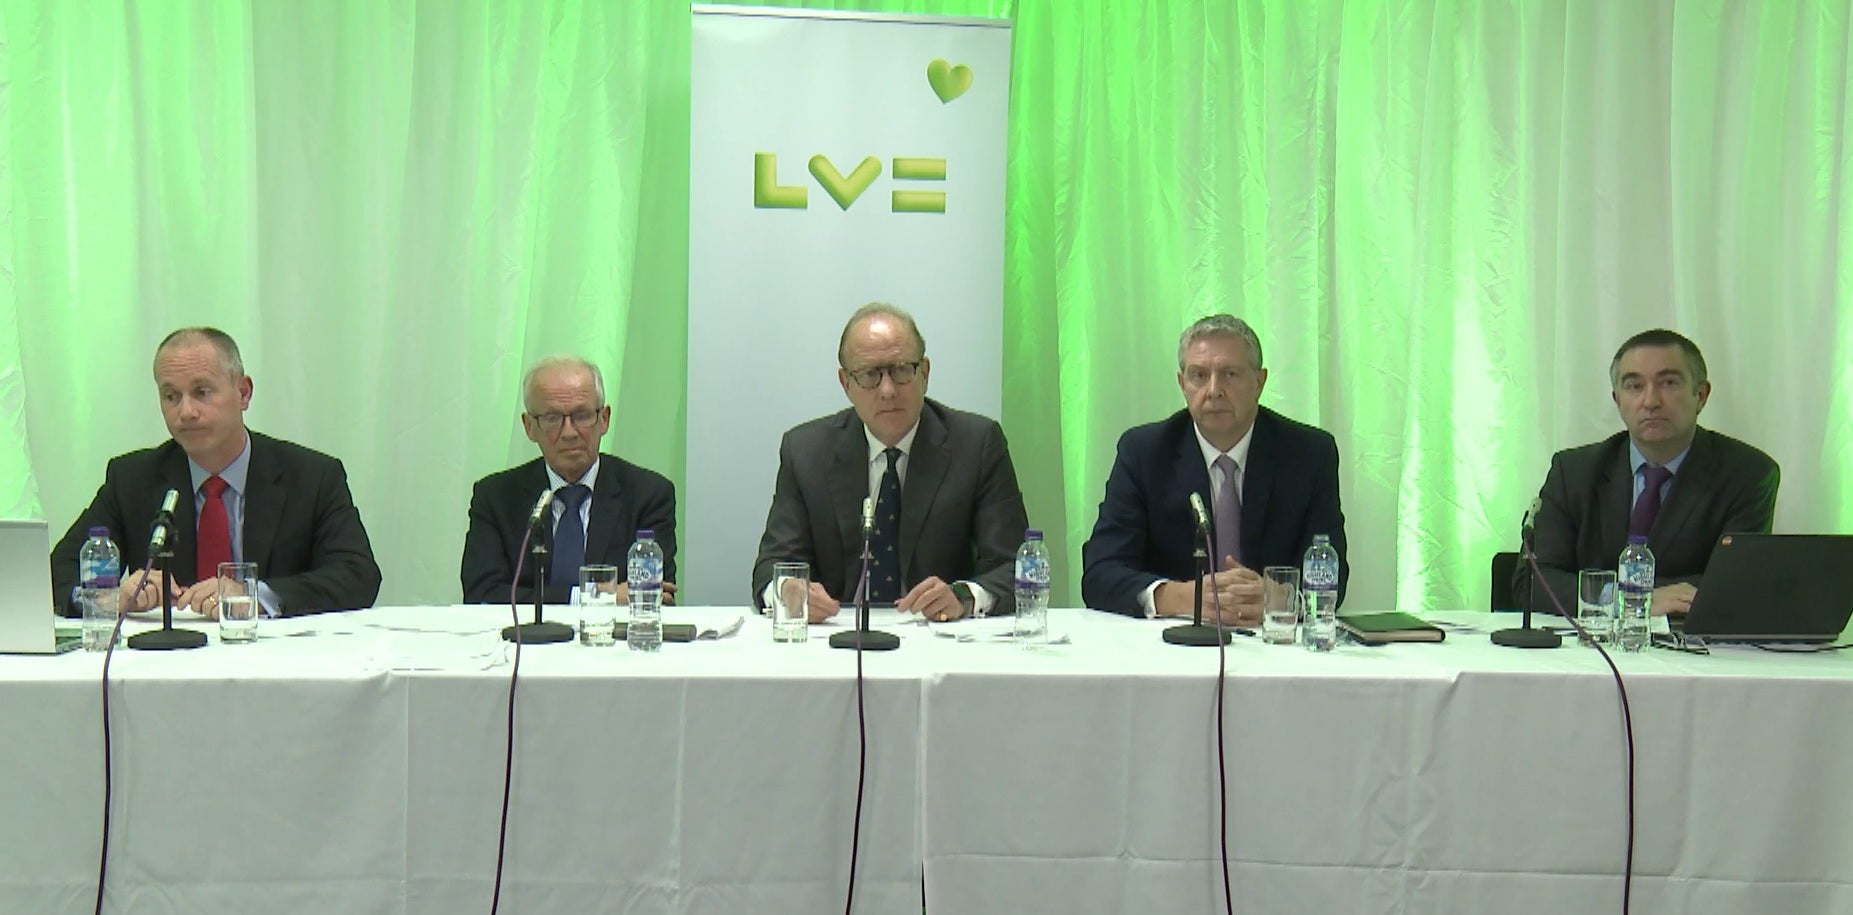 The LV= board met in Bournemouth on Friday. (LV / PA)